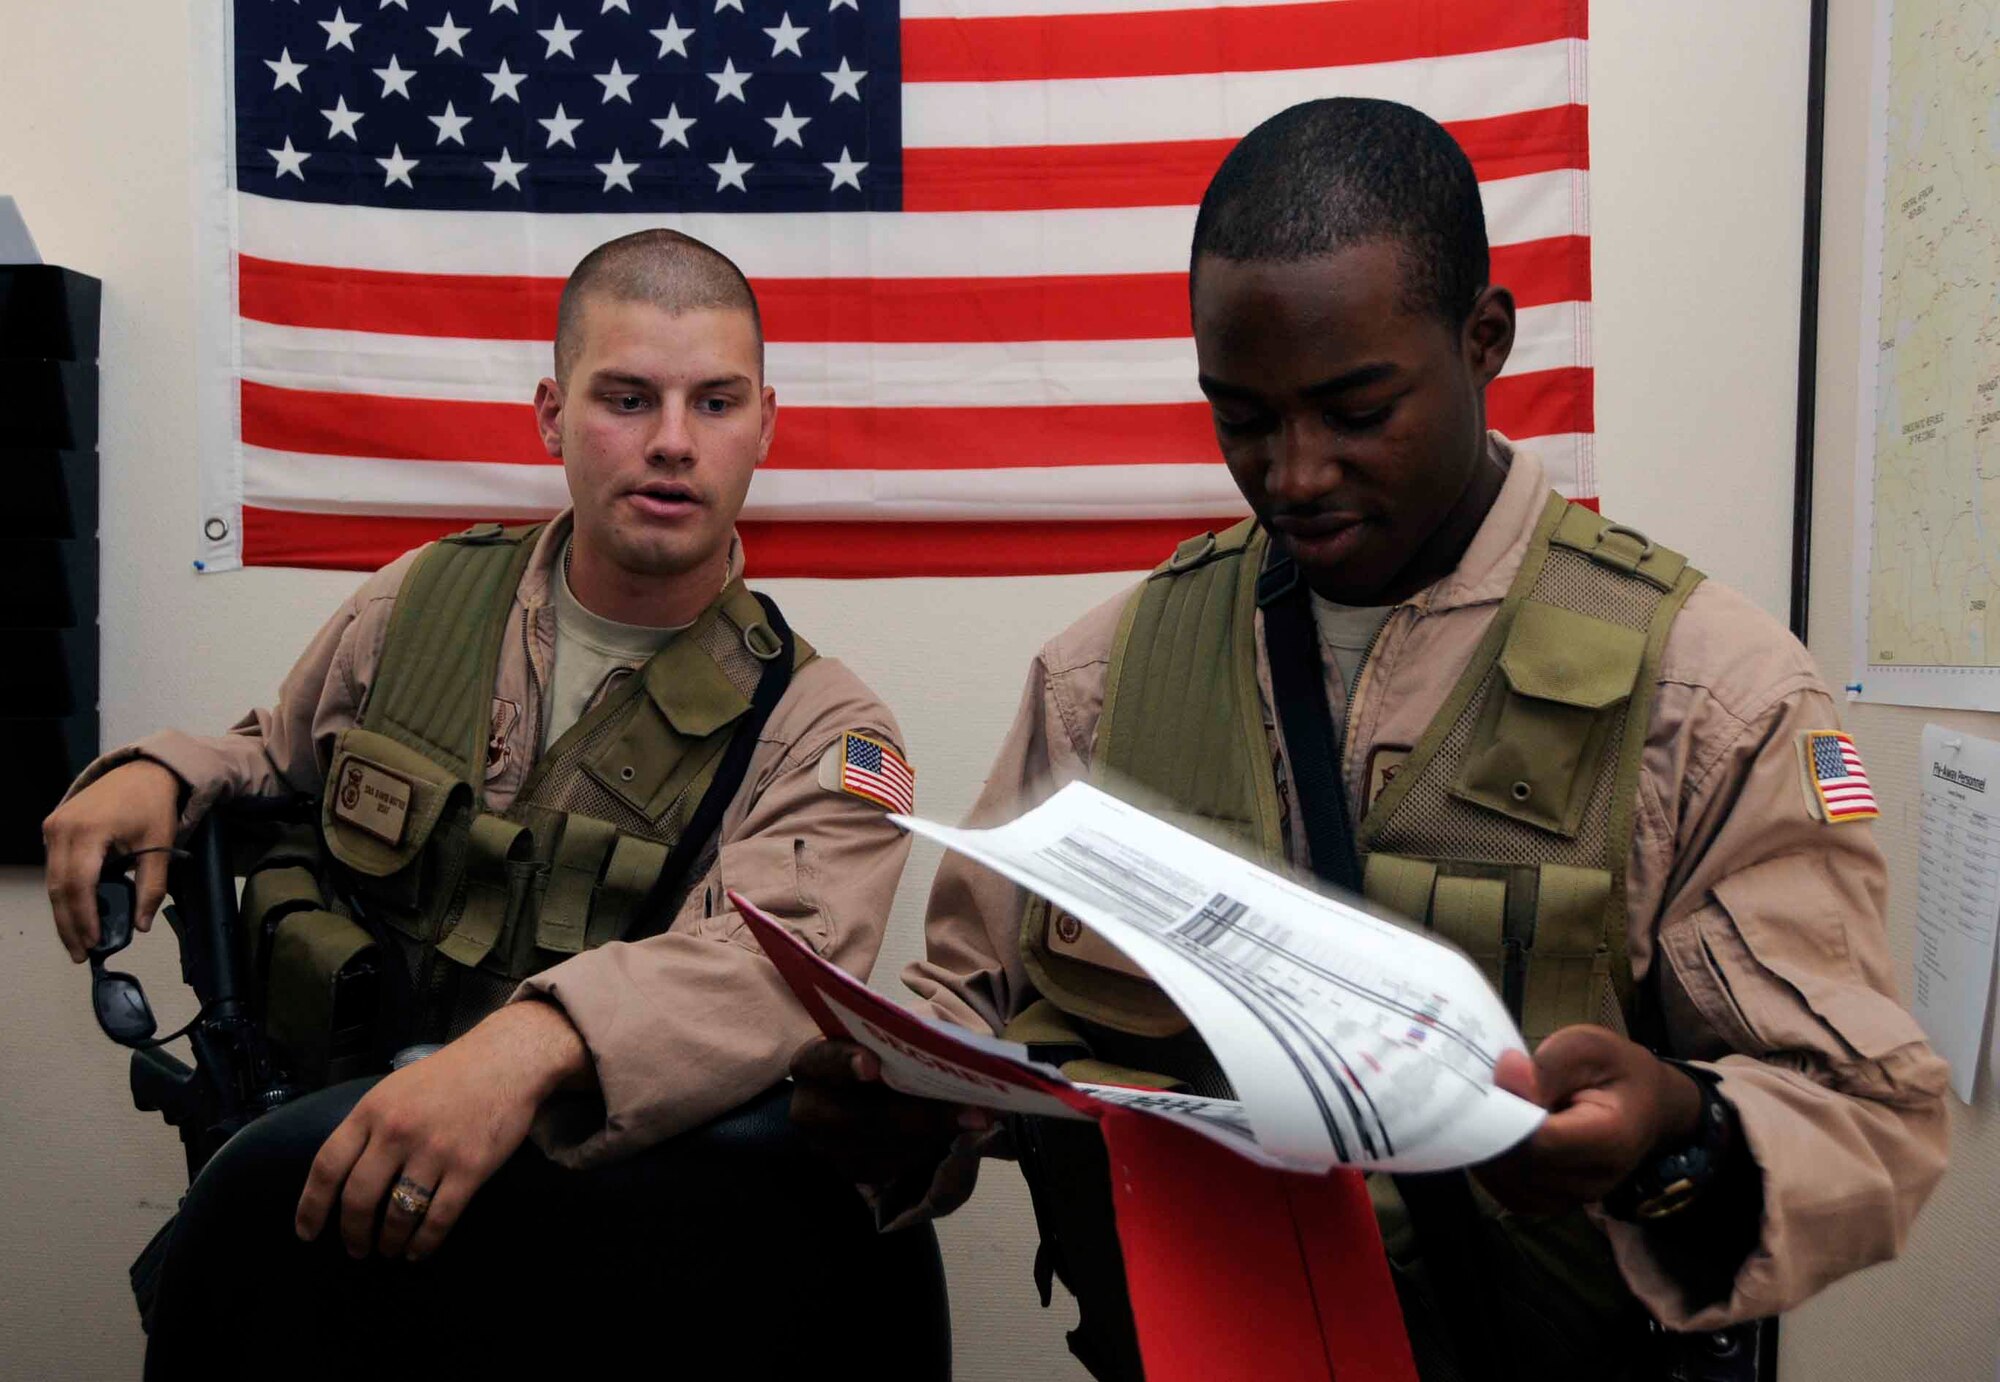 SOUTHWEST ASIA—Staff Sgt. Nahteas Murphy reviews a mission schedule with Senior Airman David Mattox June 24. Members of the Fly Away Security Team have to be ready to combat many challenges including varying work hours, fatigue, and relocating constantly. (U.S. Air Force photo/ Senior Airman Domonique Simmons)